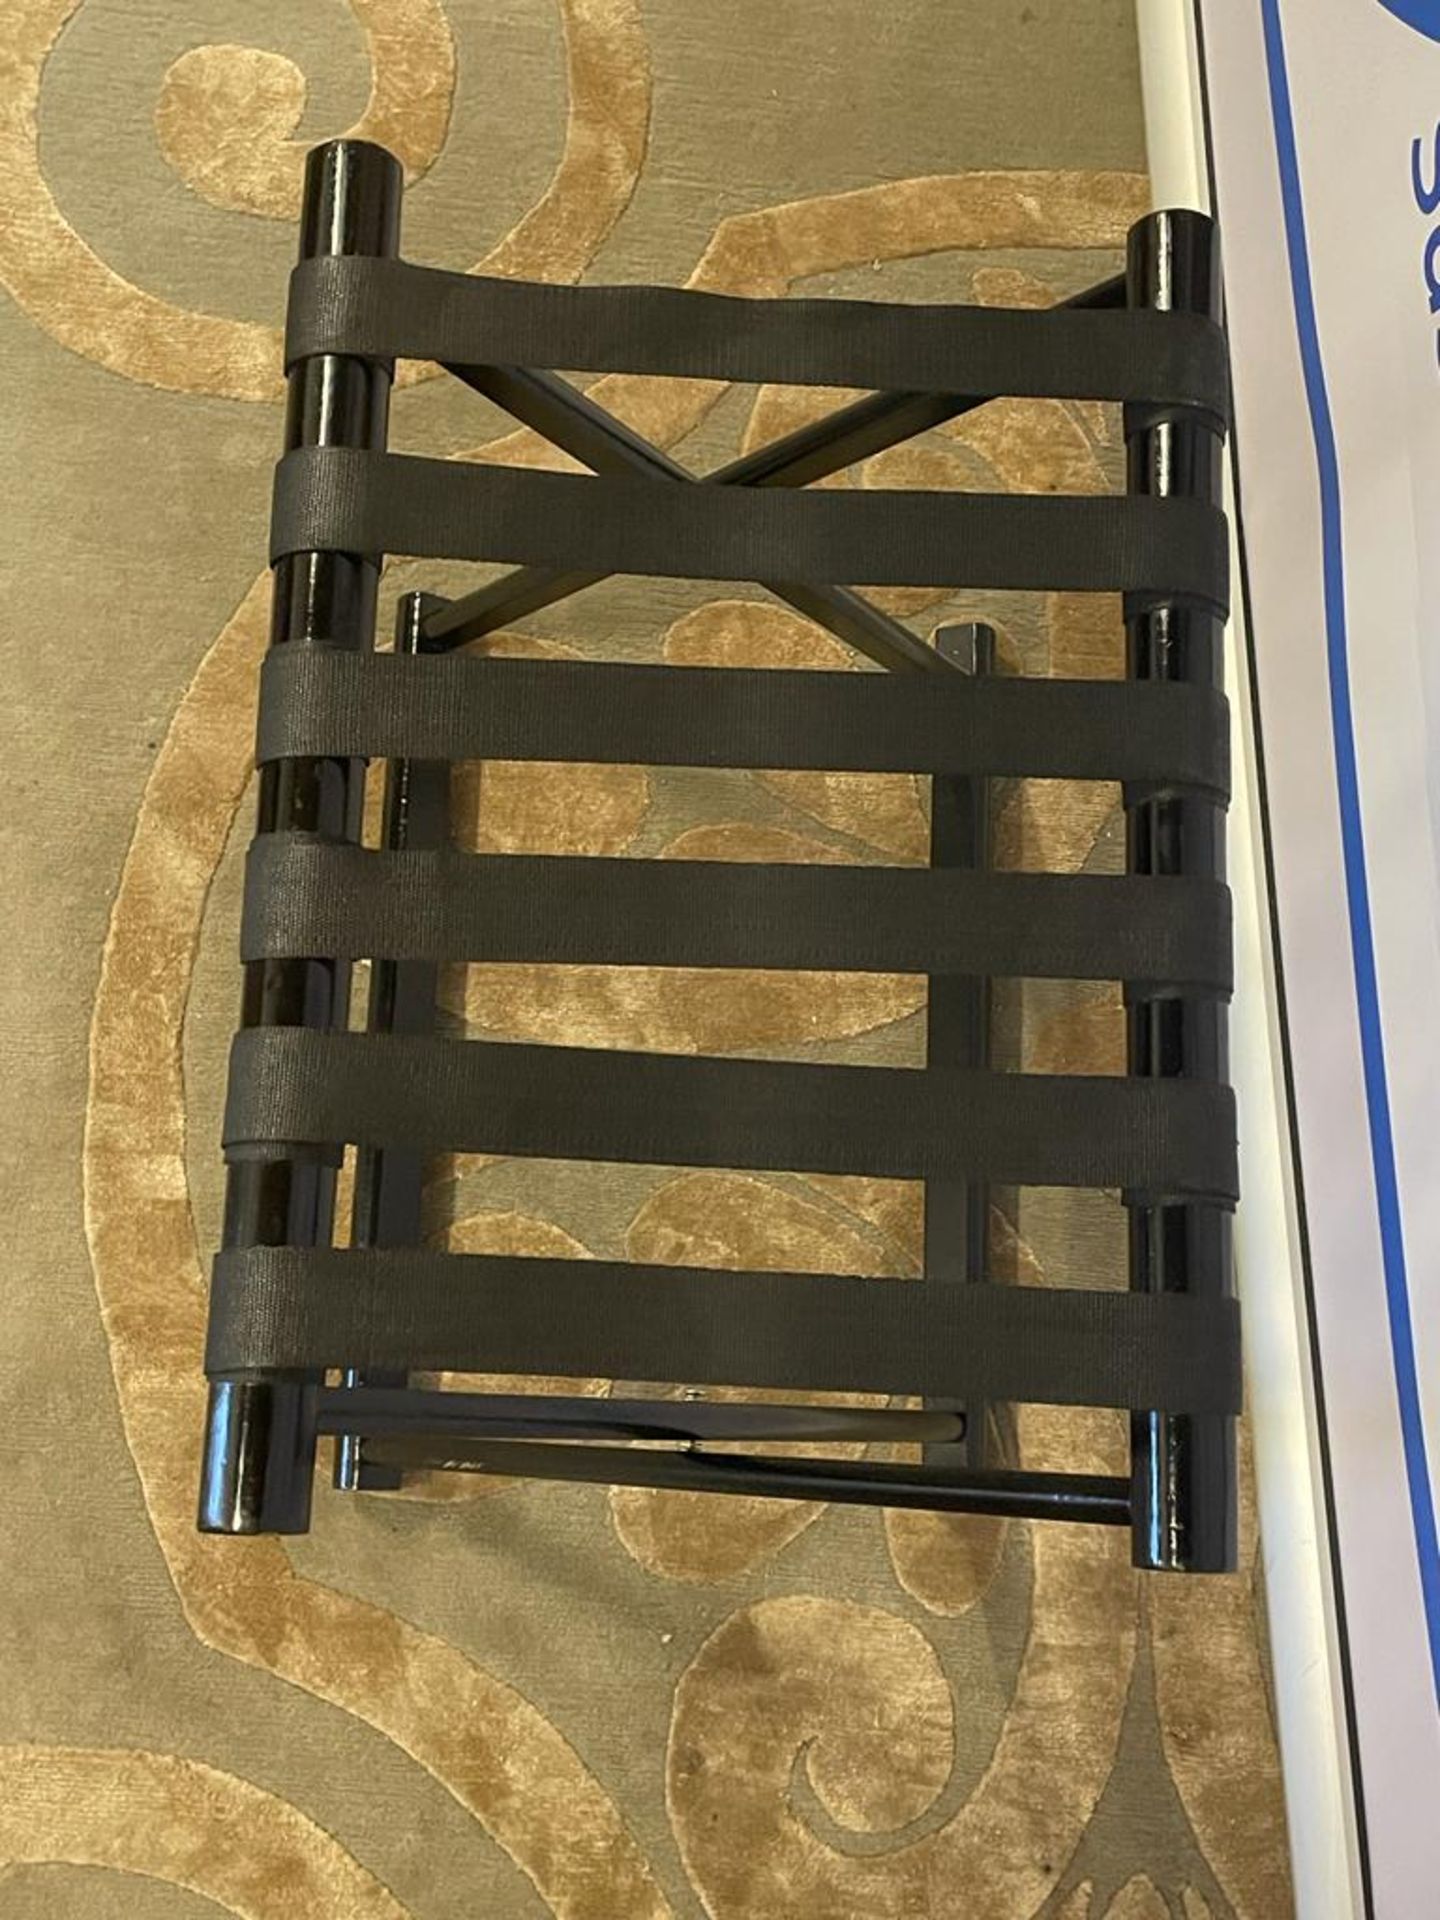 Hotel Black Wooden Luggage Rack European made without backrest Flat when folded up strong black - Image 2 of 2